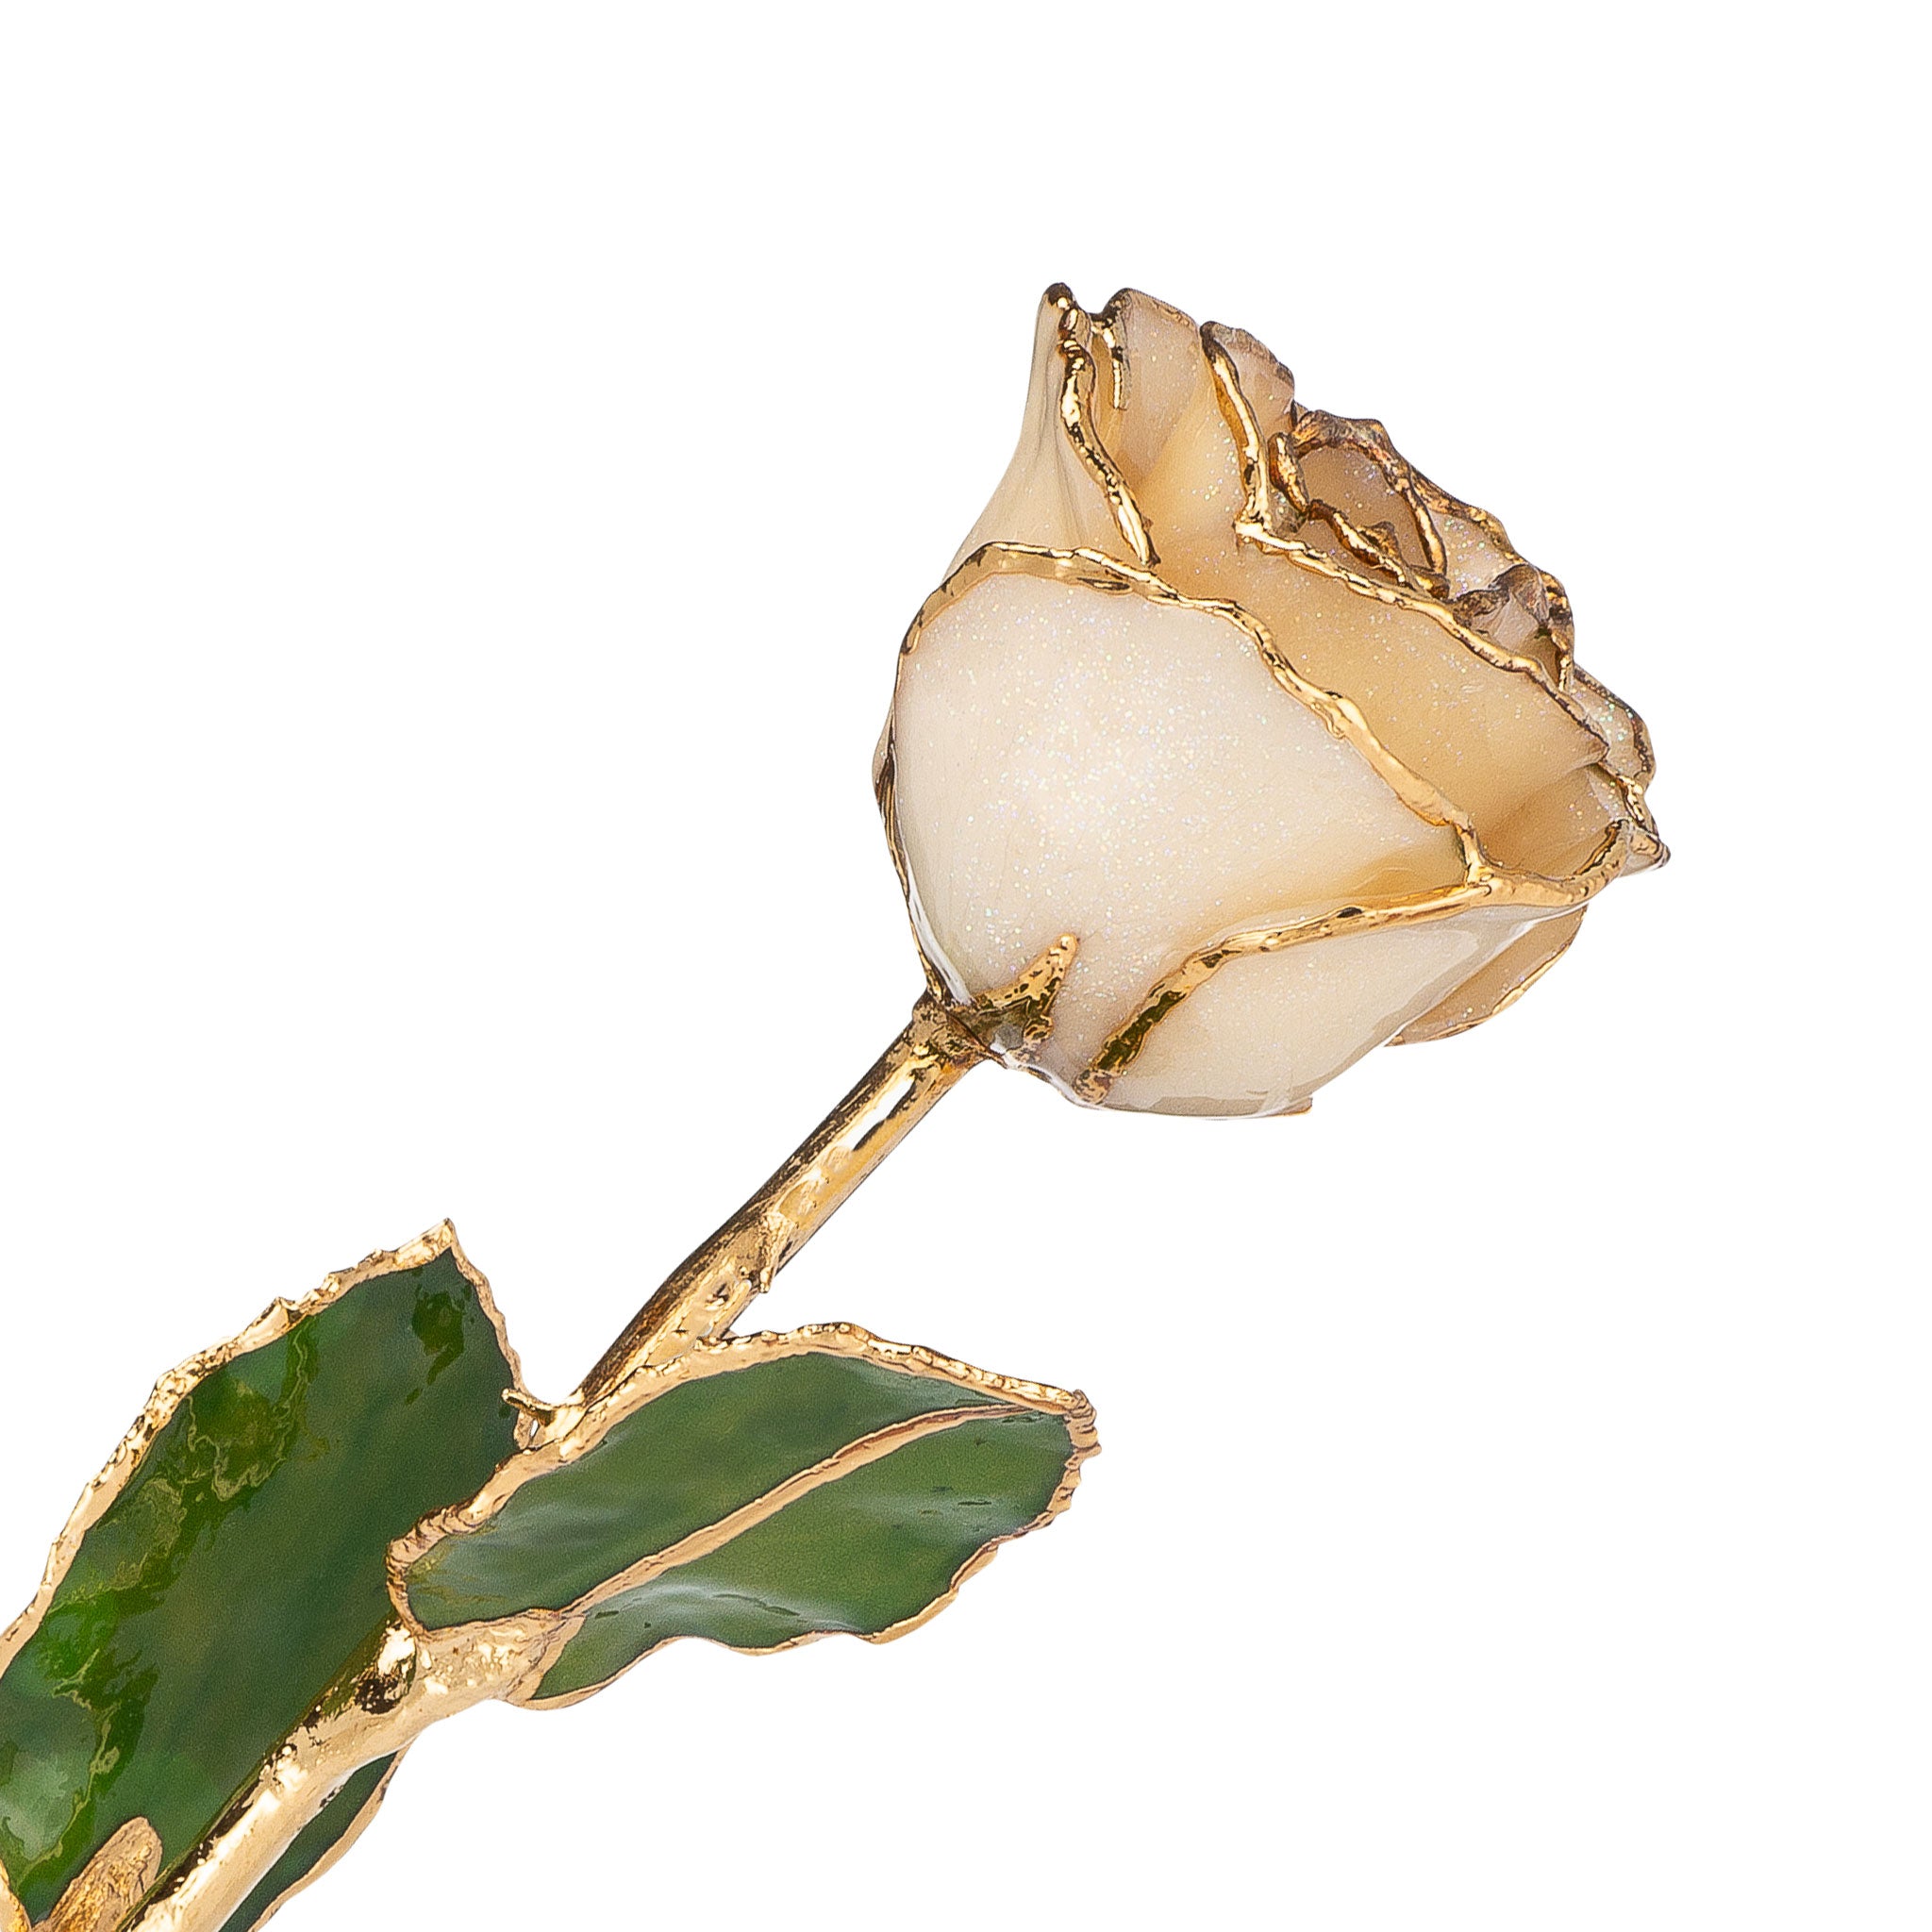 24K Gold Trimmed Forever Rose with Diamond Petals with Sparkles. View of Stem, Leaves, and Rose Petals and Showing Detail of Gold Trim